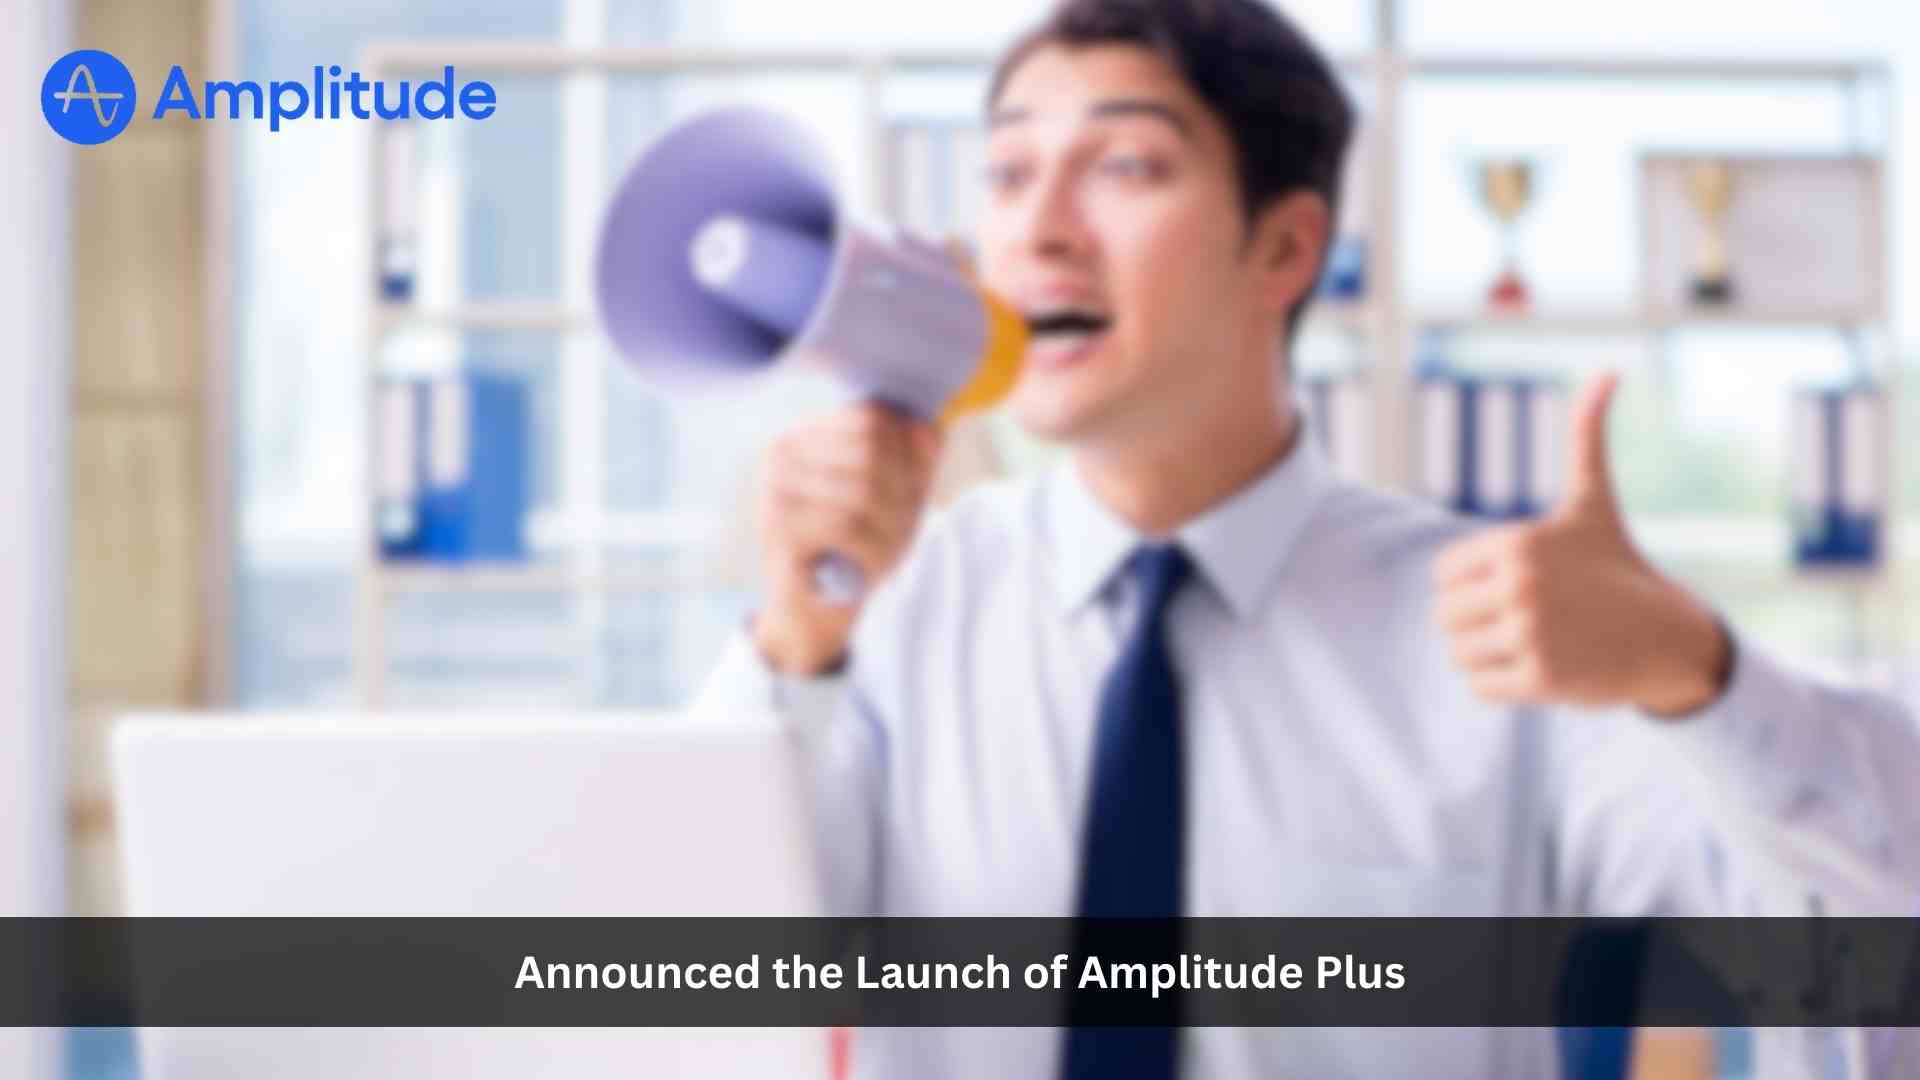 Amplitude Brings Full Power of Digital Analytics to Every Team for Less